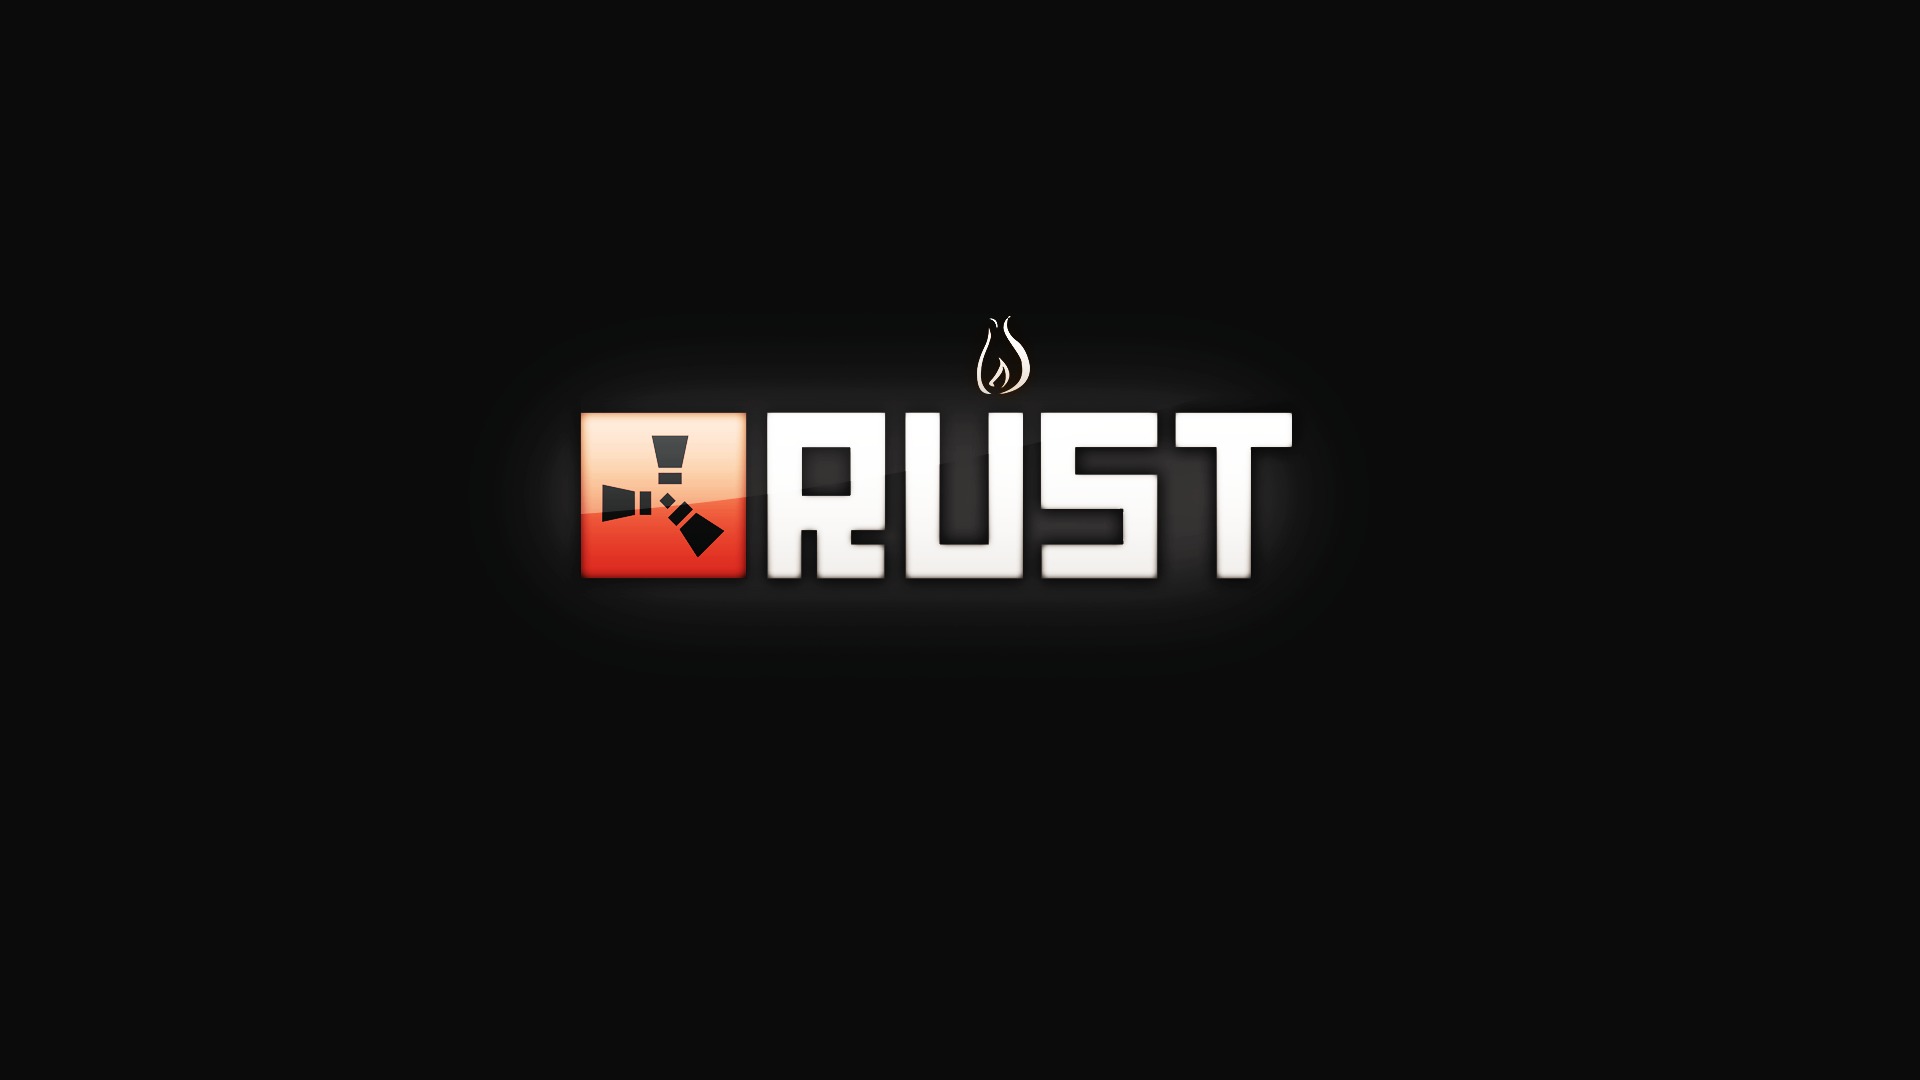 Video Game Rust HD Wallpaper | Background Image